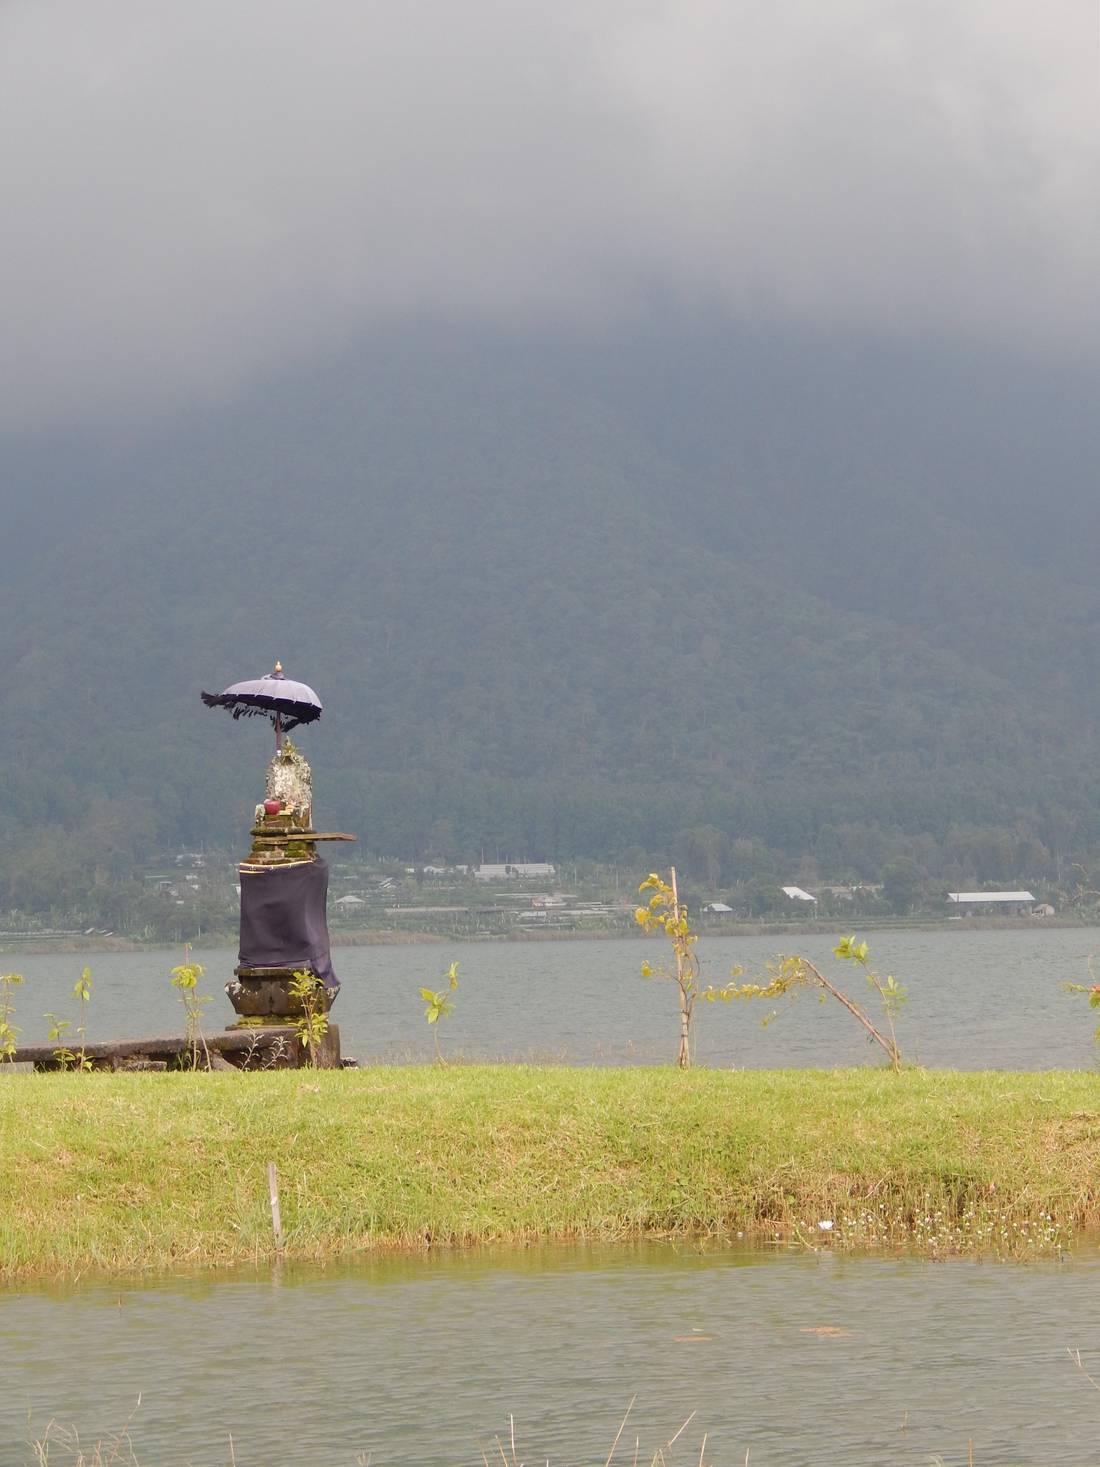 After the 1 hour trip on the uphill road here the lake open up, with it’s beautiful shores ranging beneath the Bedugul